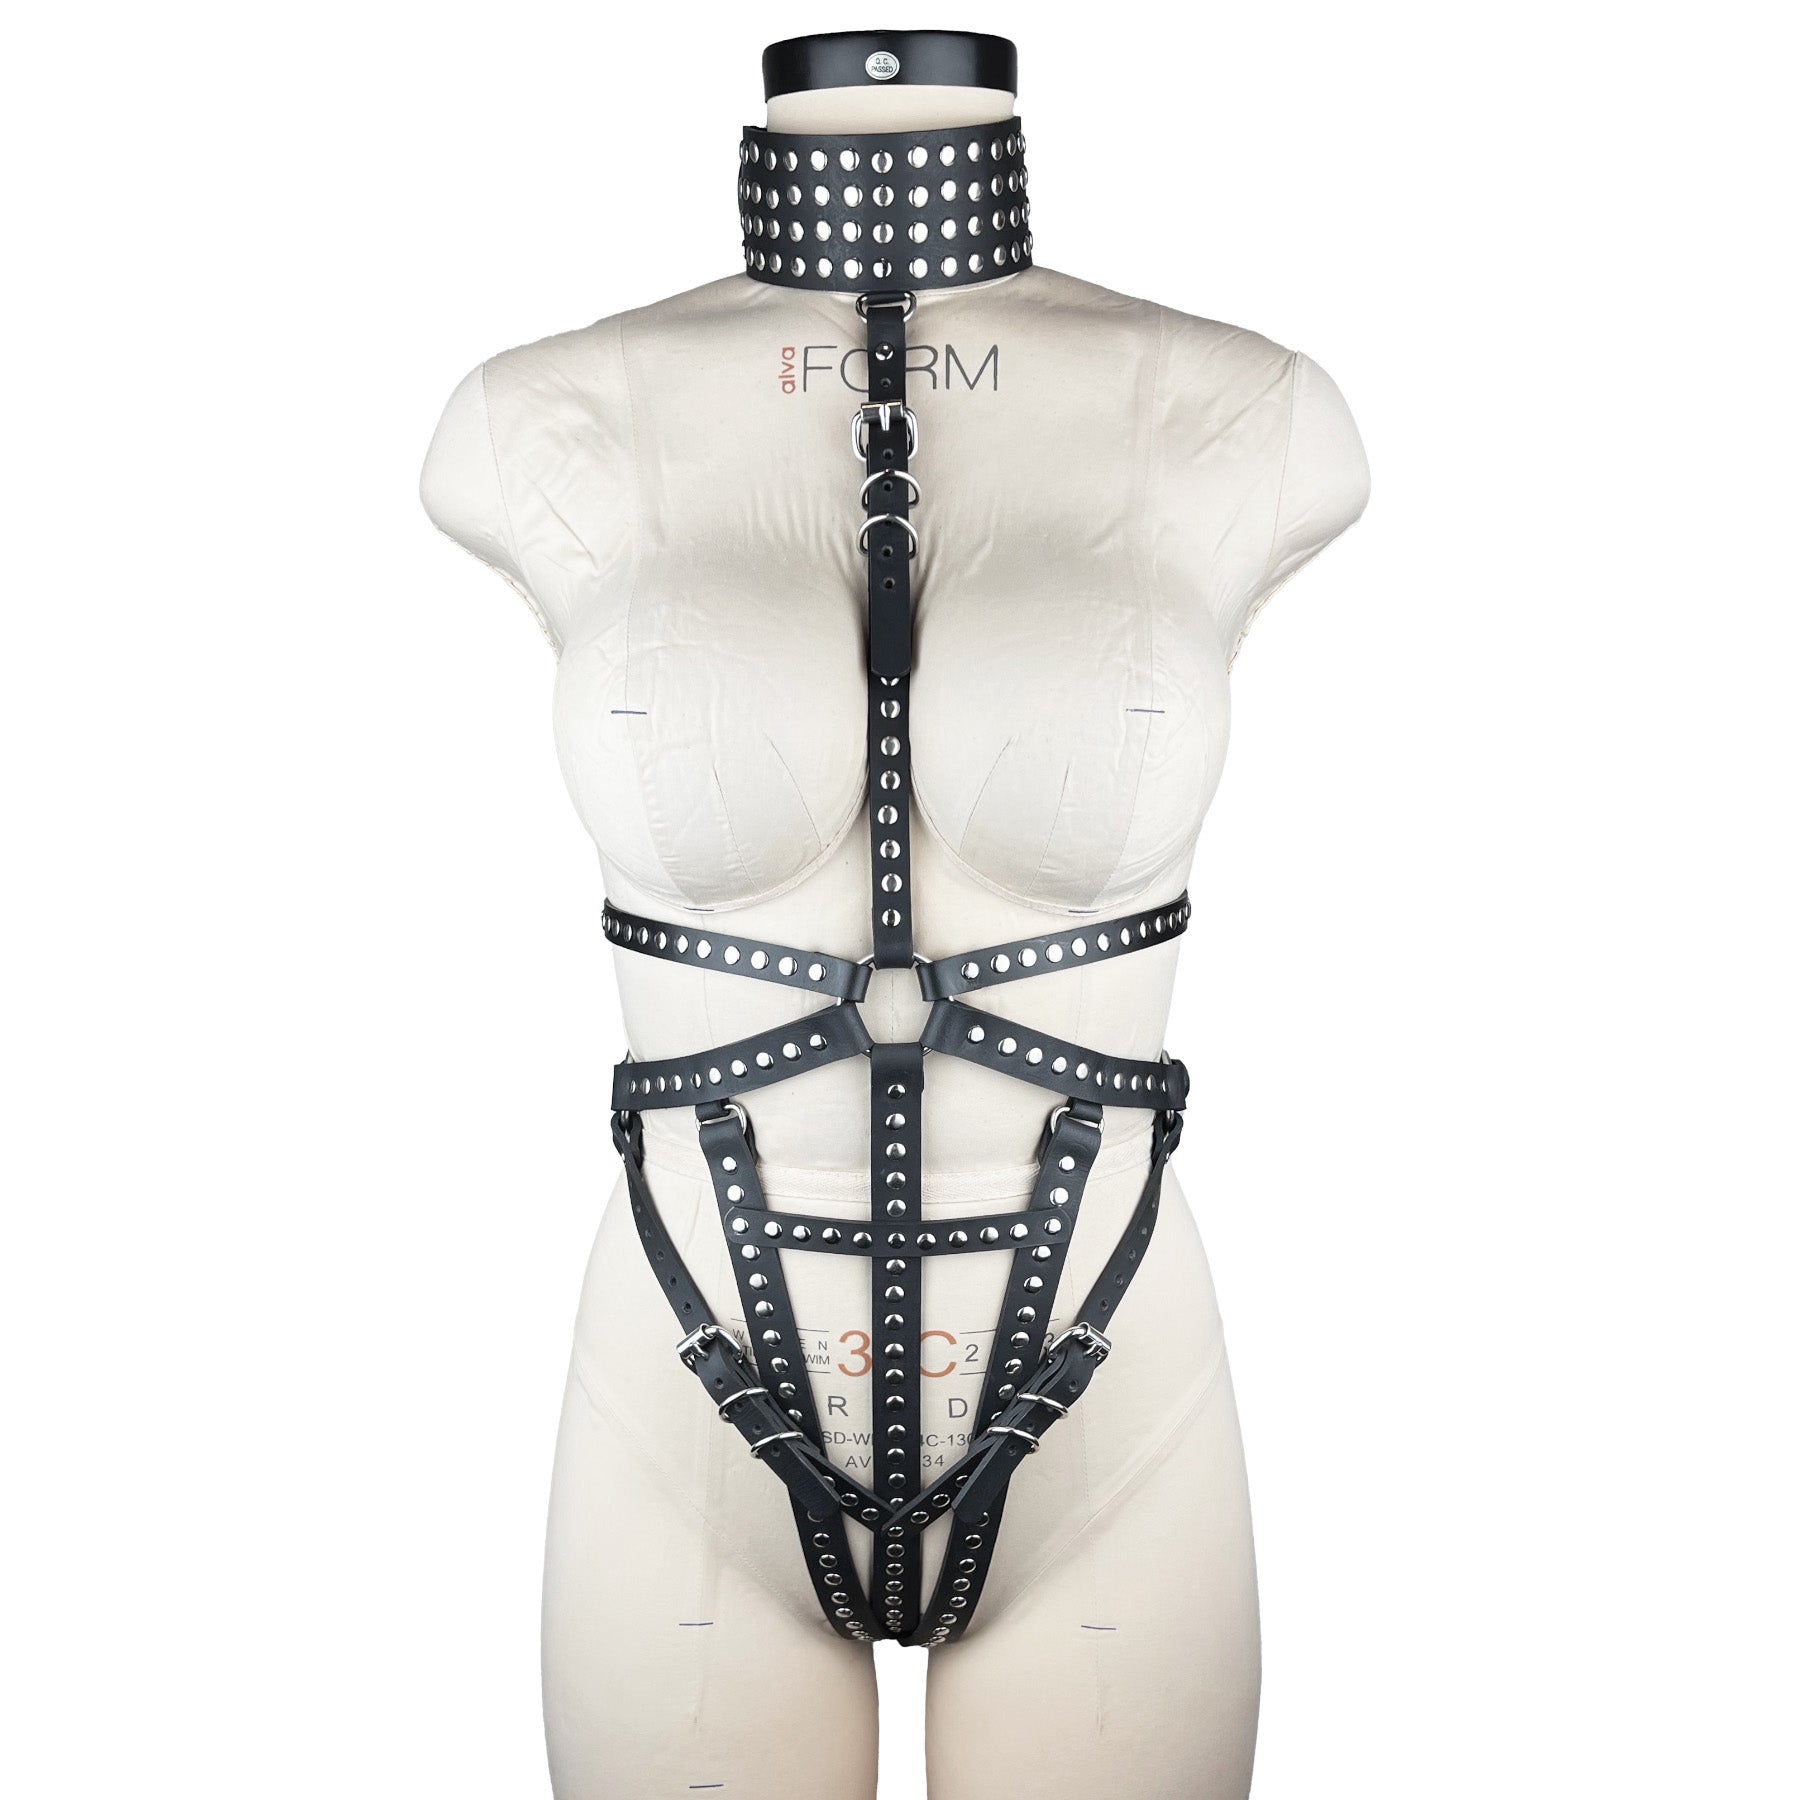 luxury Italian leather and silver studs fashion and fetish body harness, bespoke, made-to-order in nyc, front view